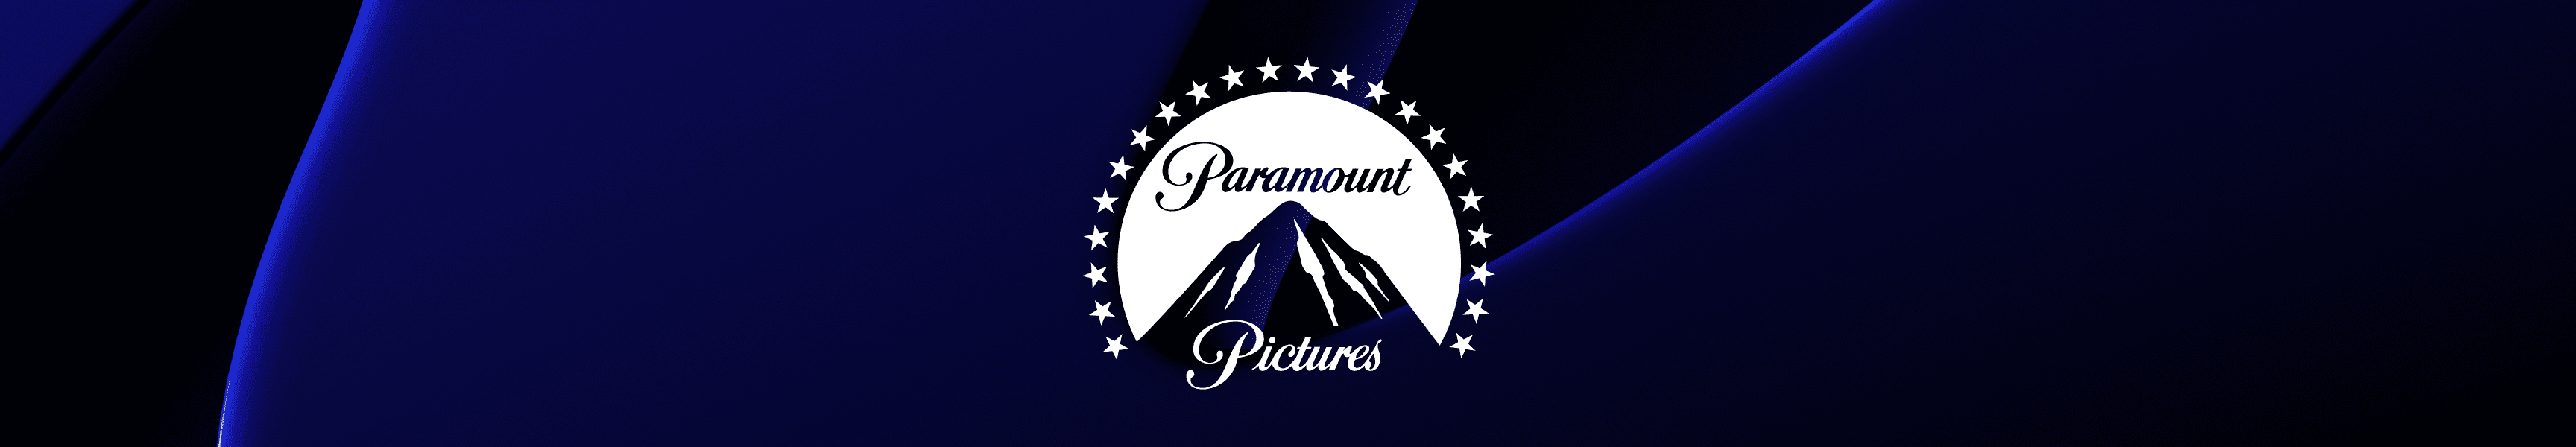 Paramount Pictures Phone Cases